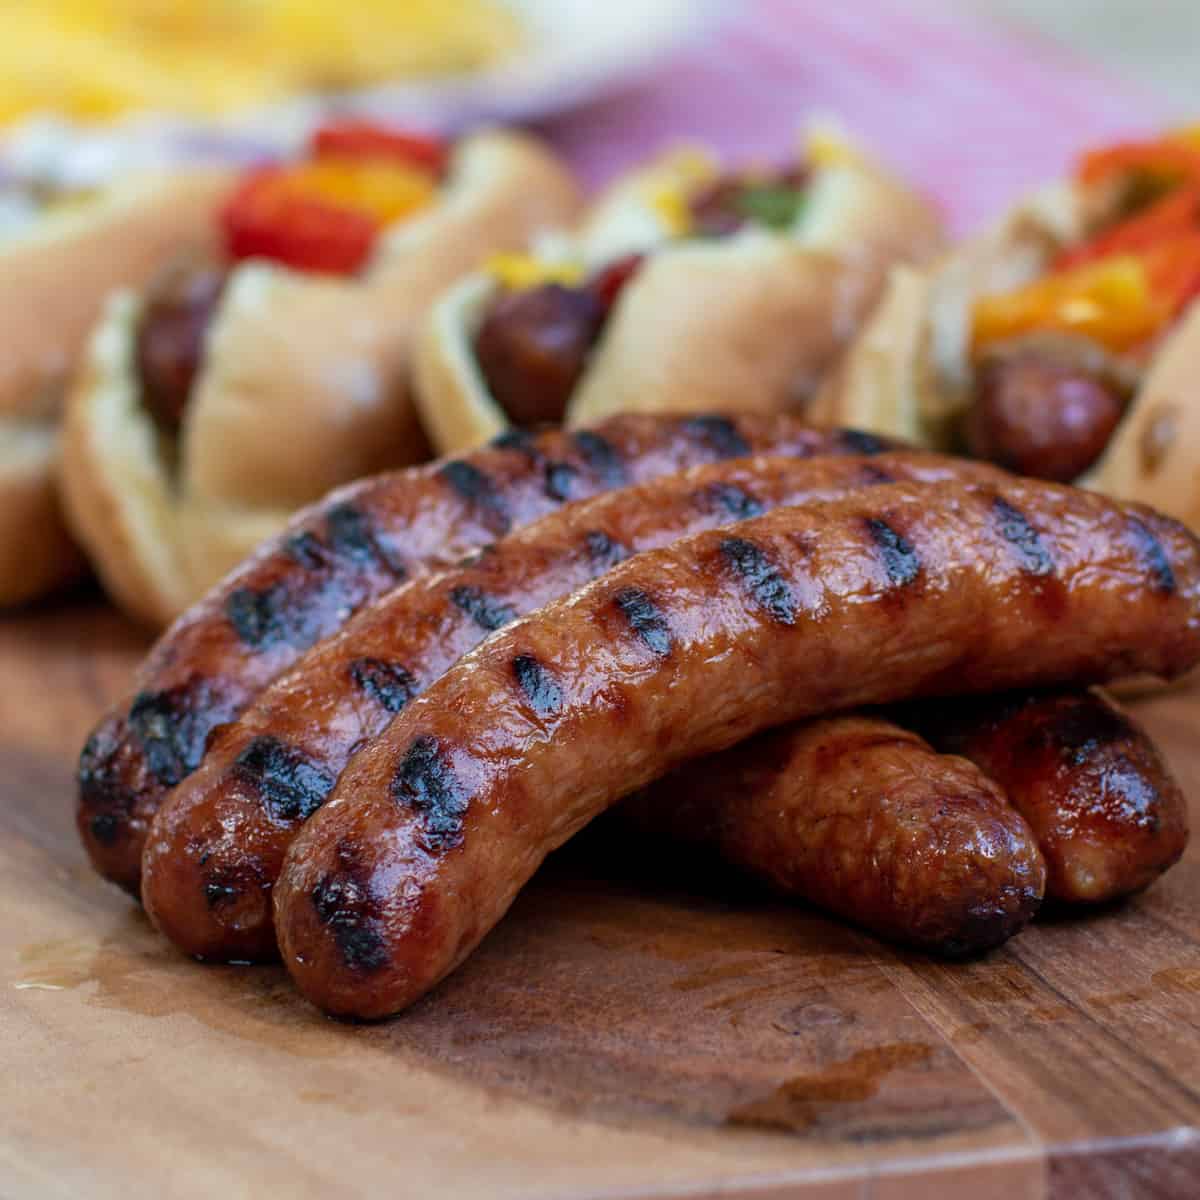 https://www.theblackpeppercorn.com/wp-content/uploads/2020/08/How-to-Grill-Italian-Sausages-square-1.jpg